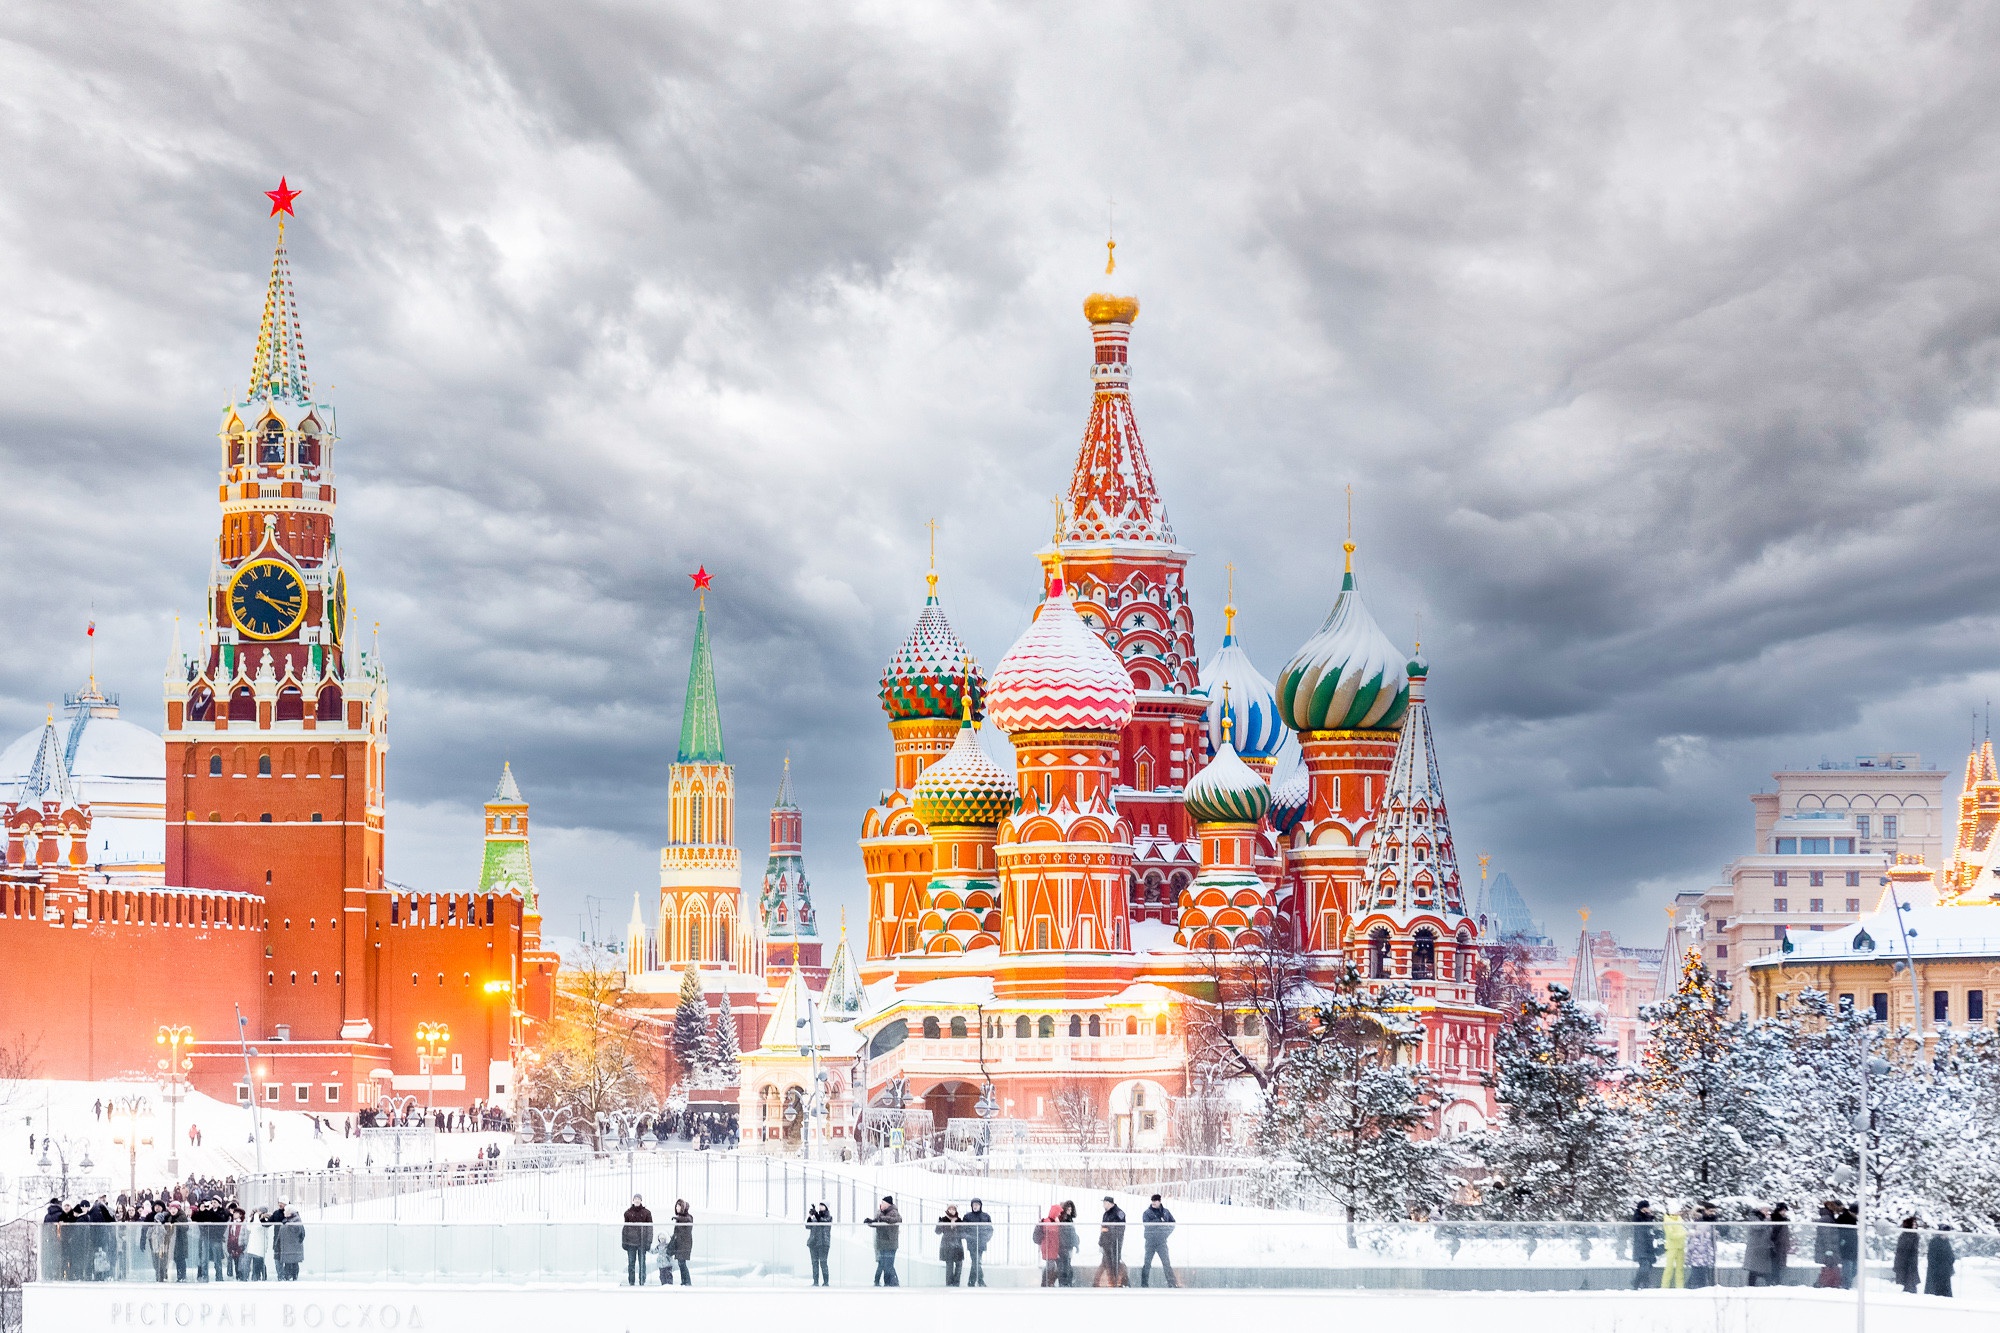 Moscow Russia Kremlin Red Square Cathedral Winter Snow People Sky Clouds City Cityscape Saint Basils 2000x1333